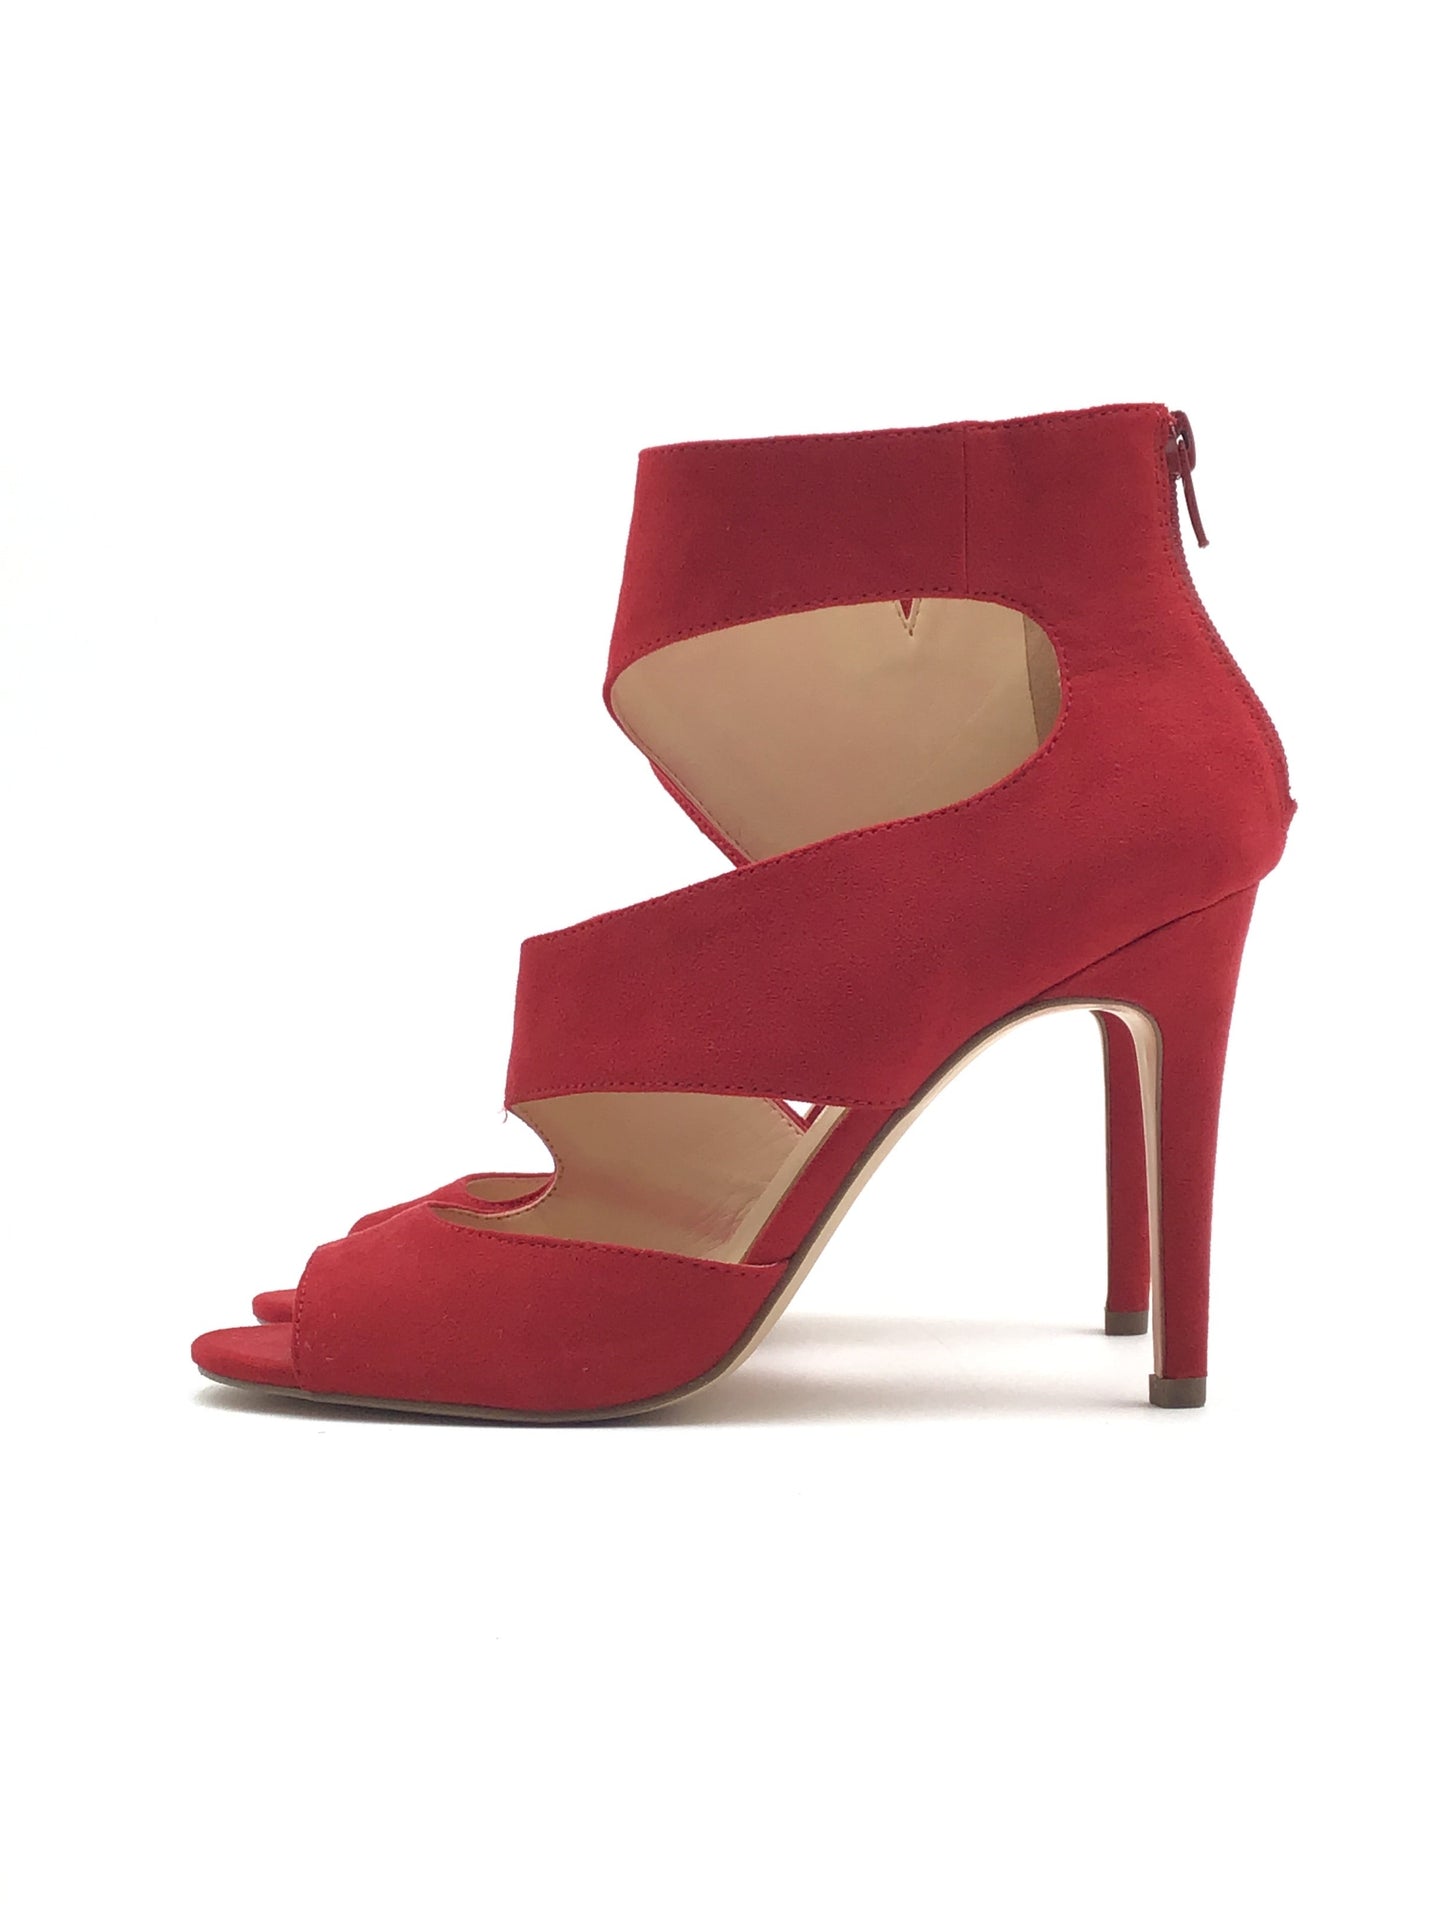 Red Shoes Heels Stiletto Jessica Simpson, Size 9